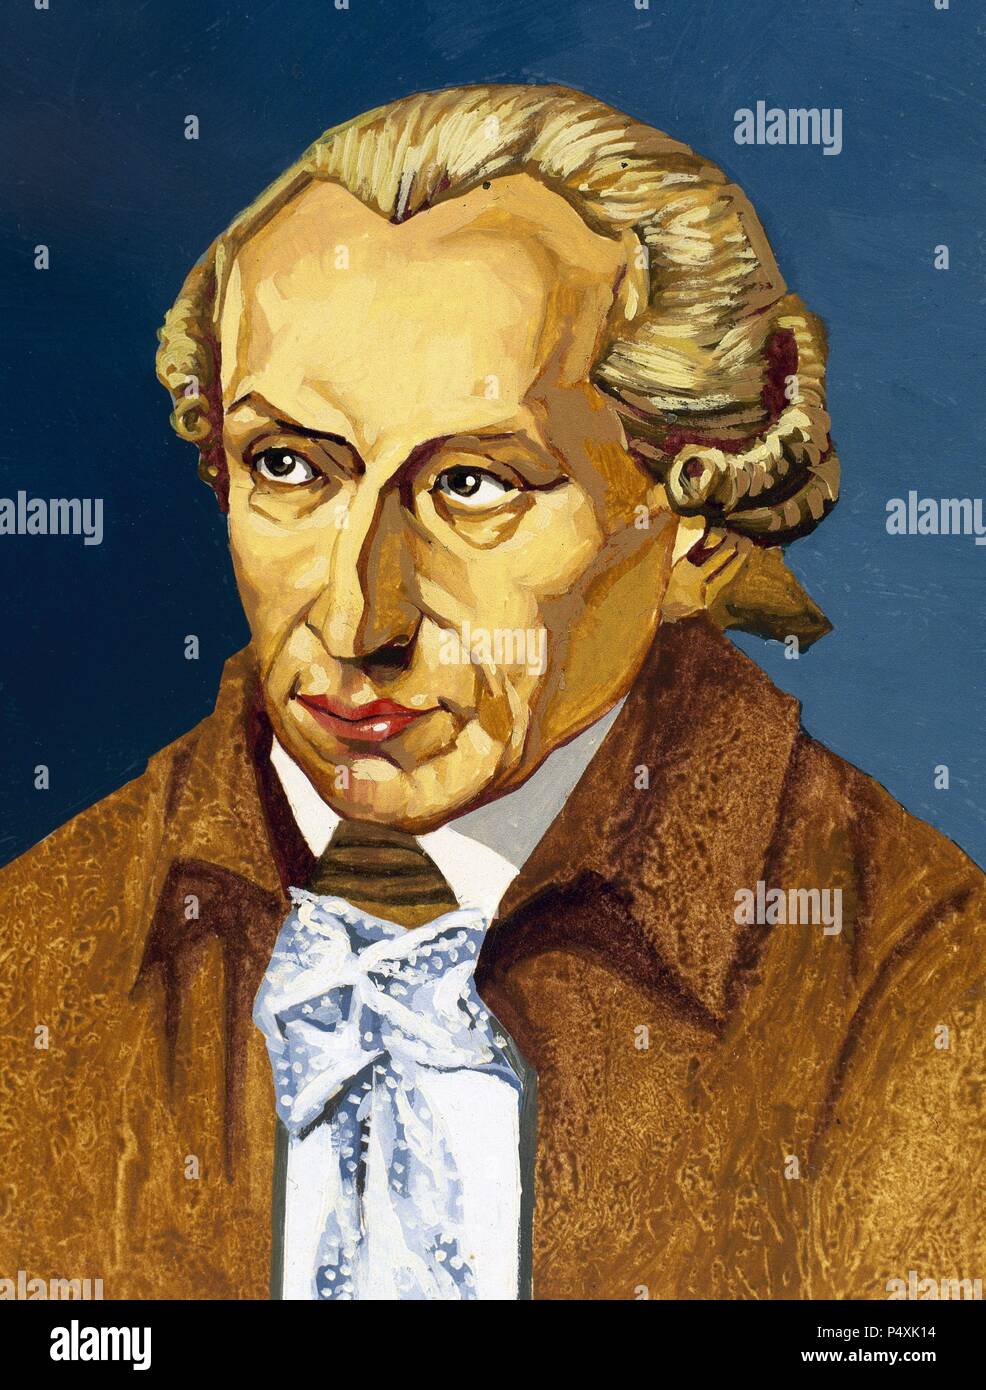 Immanuel Kant (1724-1804). German philosopher. End of the 18th Century Enlightenment. Stock Photo